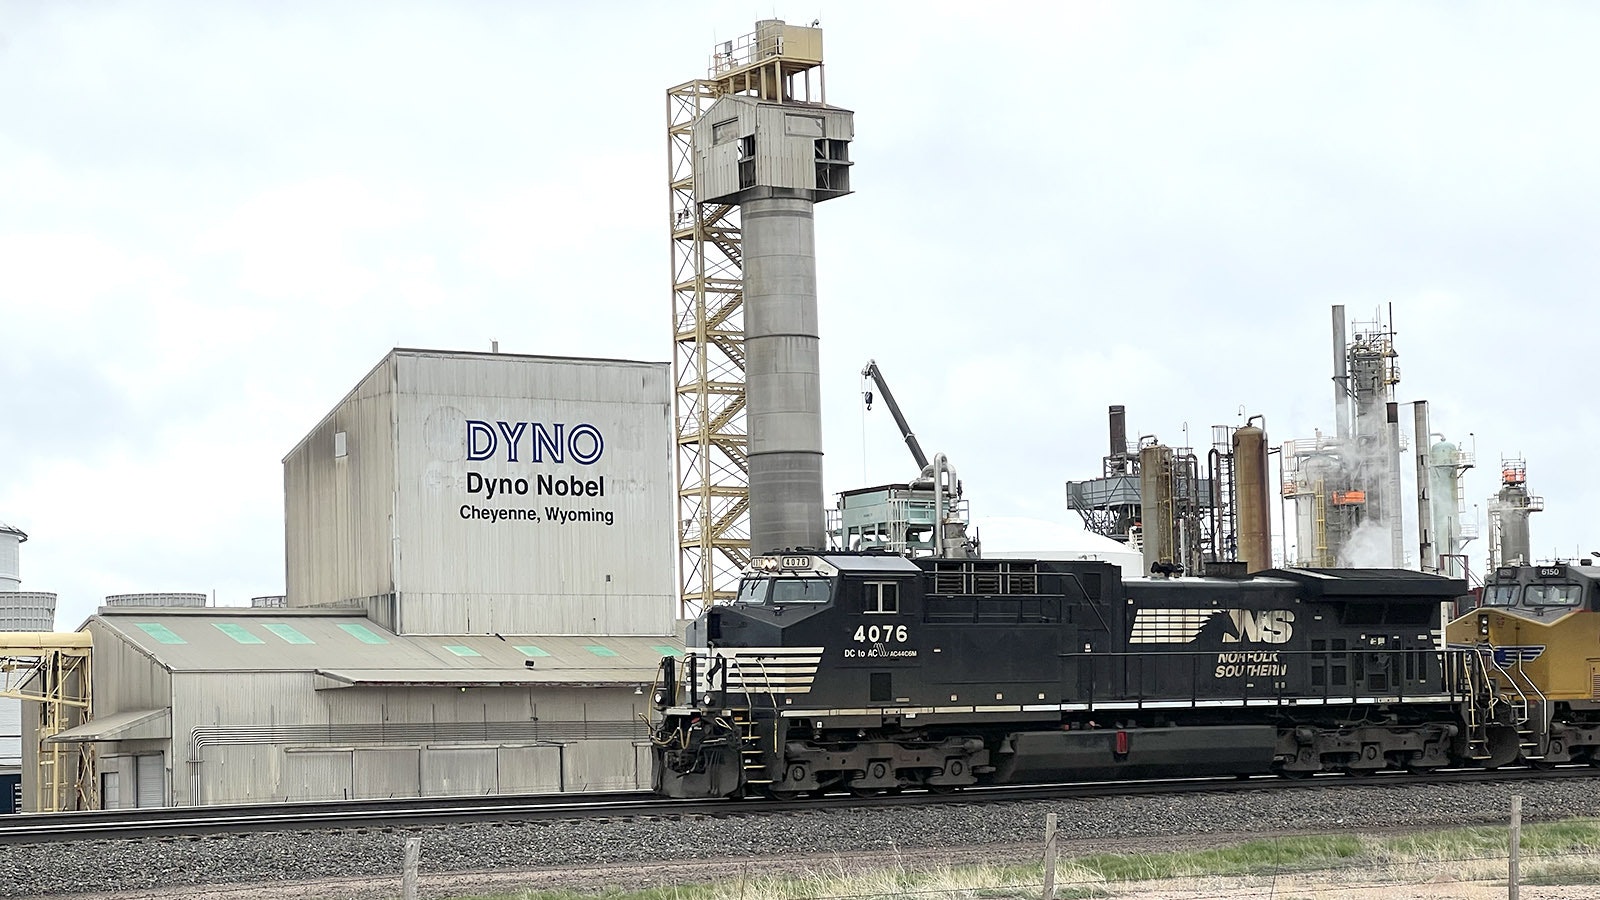 A railcar carrying 60,000 pounds of Dyno Nobel ammonia nitrate, a chemical fertilizer that also can be used to make explosives, left Cheyenne full and arrived two weeks later in California empty.